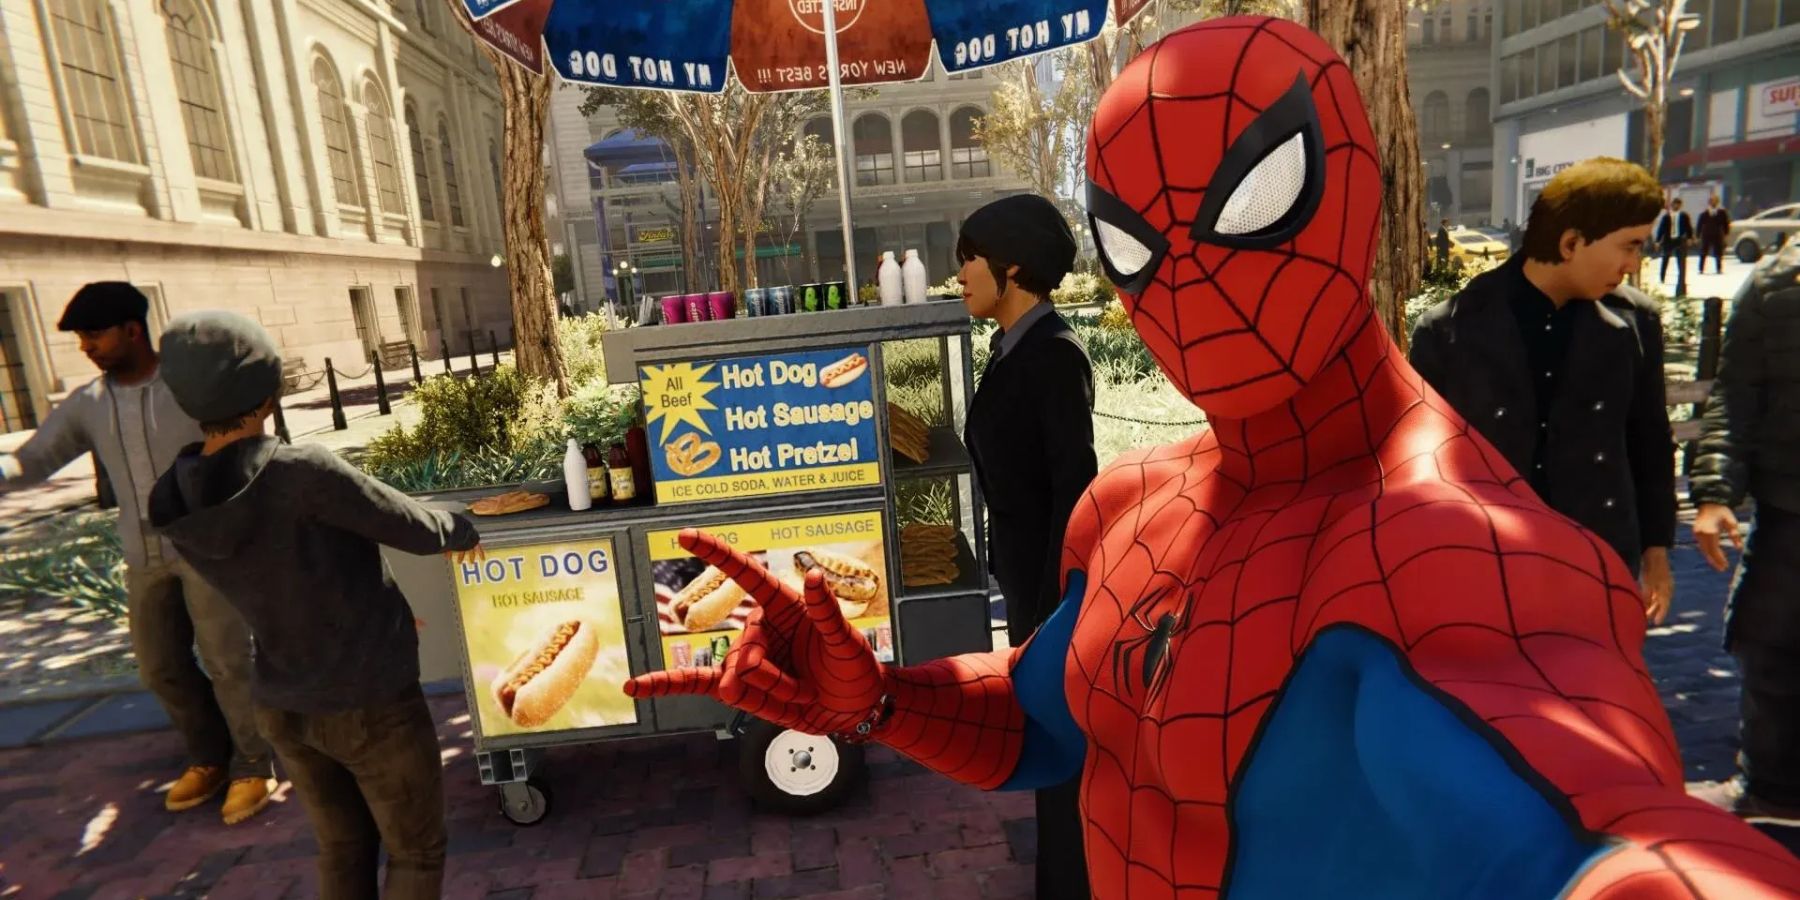 Marvel's Spider-Man's gameplay and visuals are mindlessly enjoyable, like eating junk food.